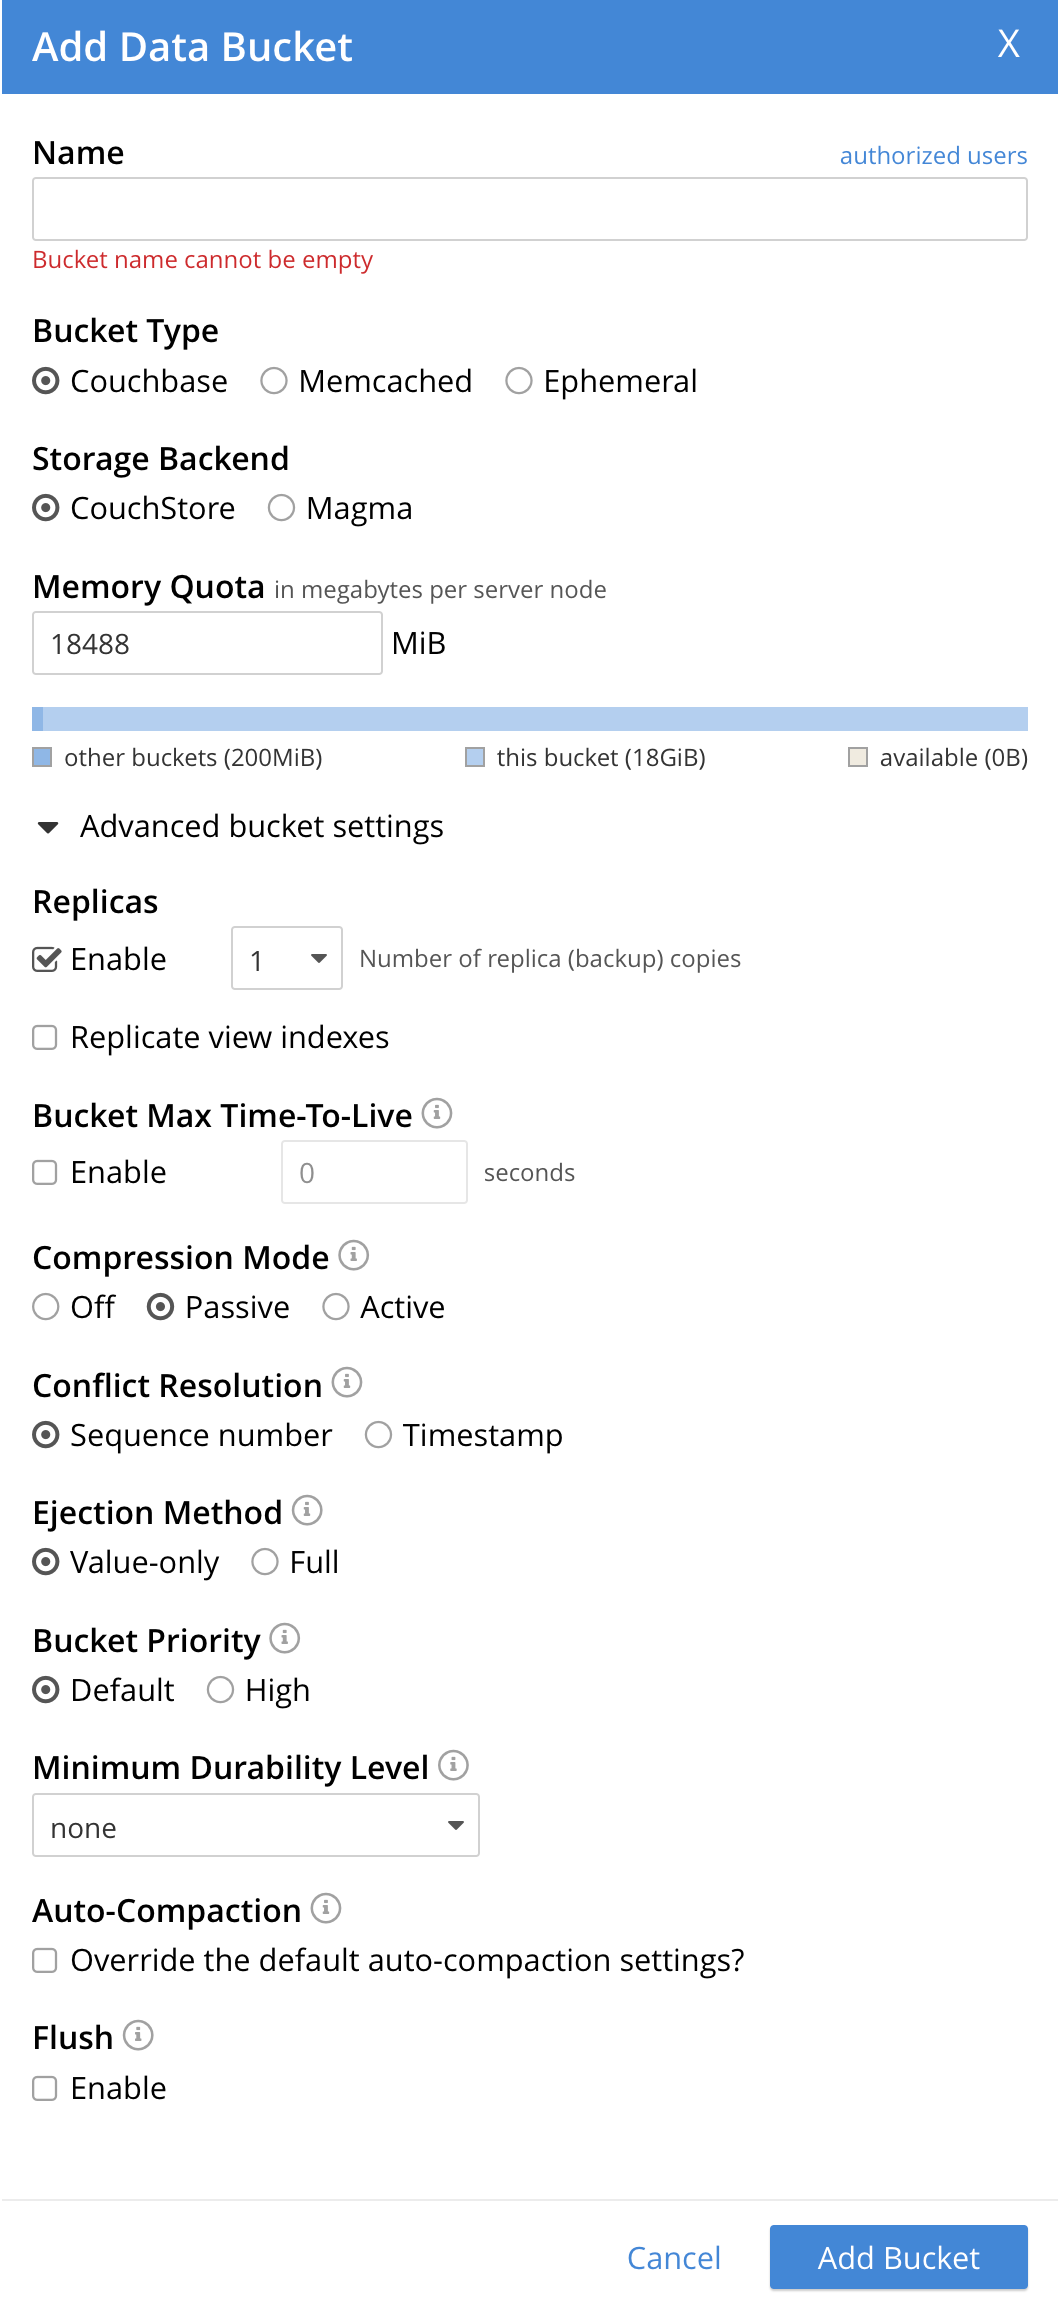 An image that displays the Add Data Bucket dialog, with a Couchbase Bucket Type and CouchStore Storage Backend selected. The Advanced bucket settings are expanded and to show the default selections for a Couchbase and Couchstore bucket.